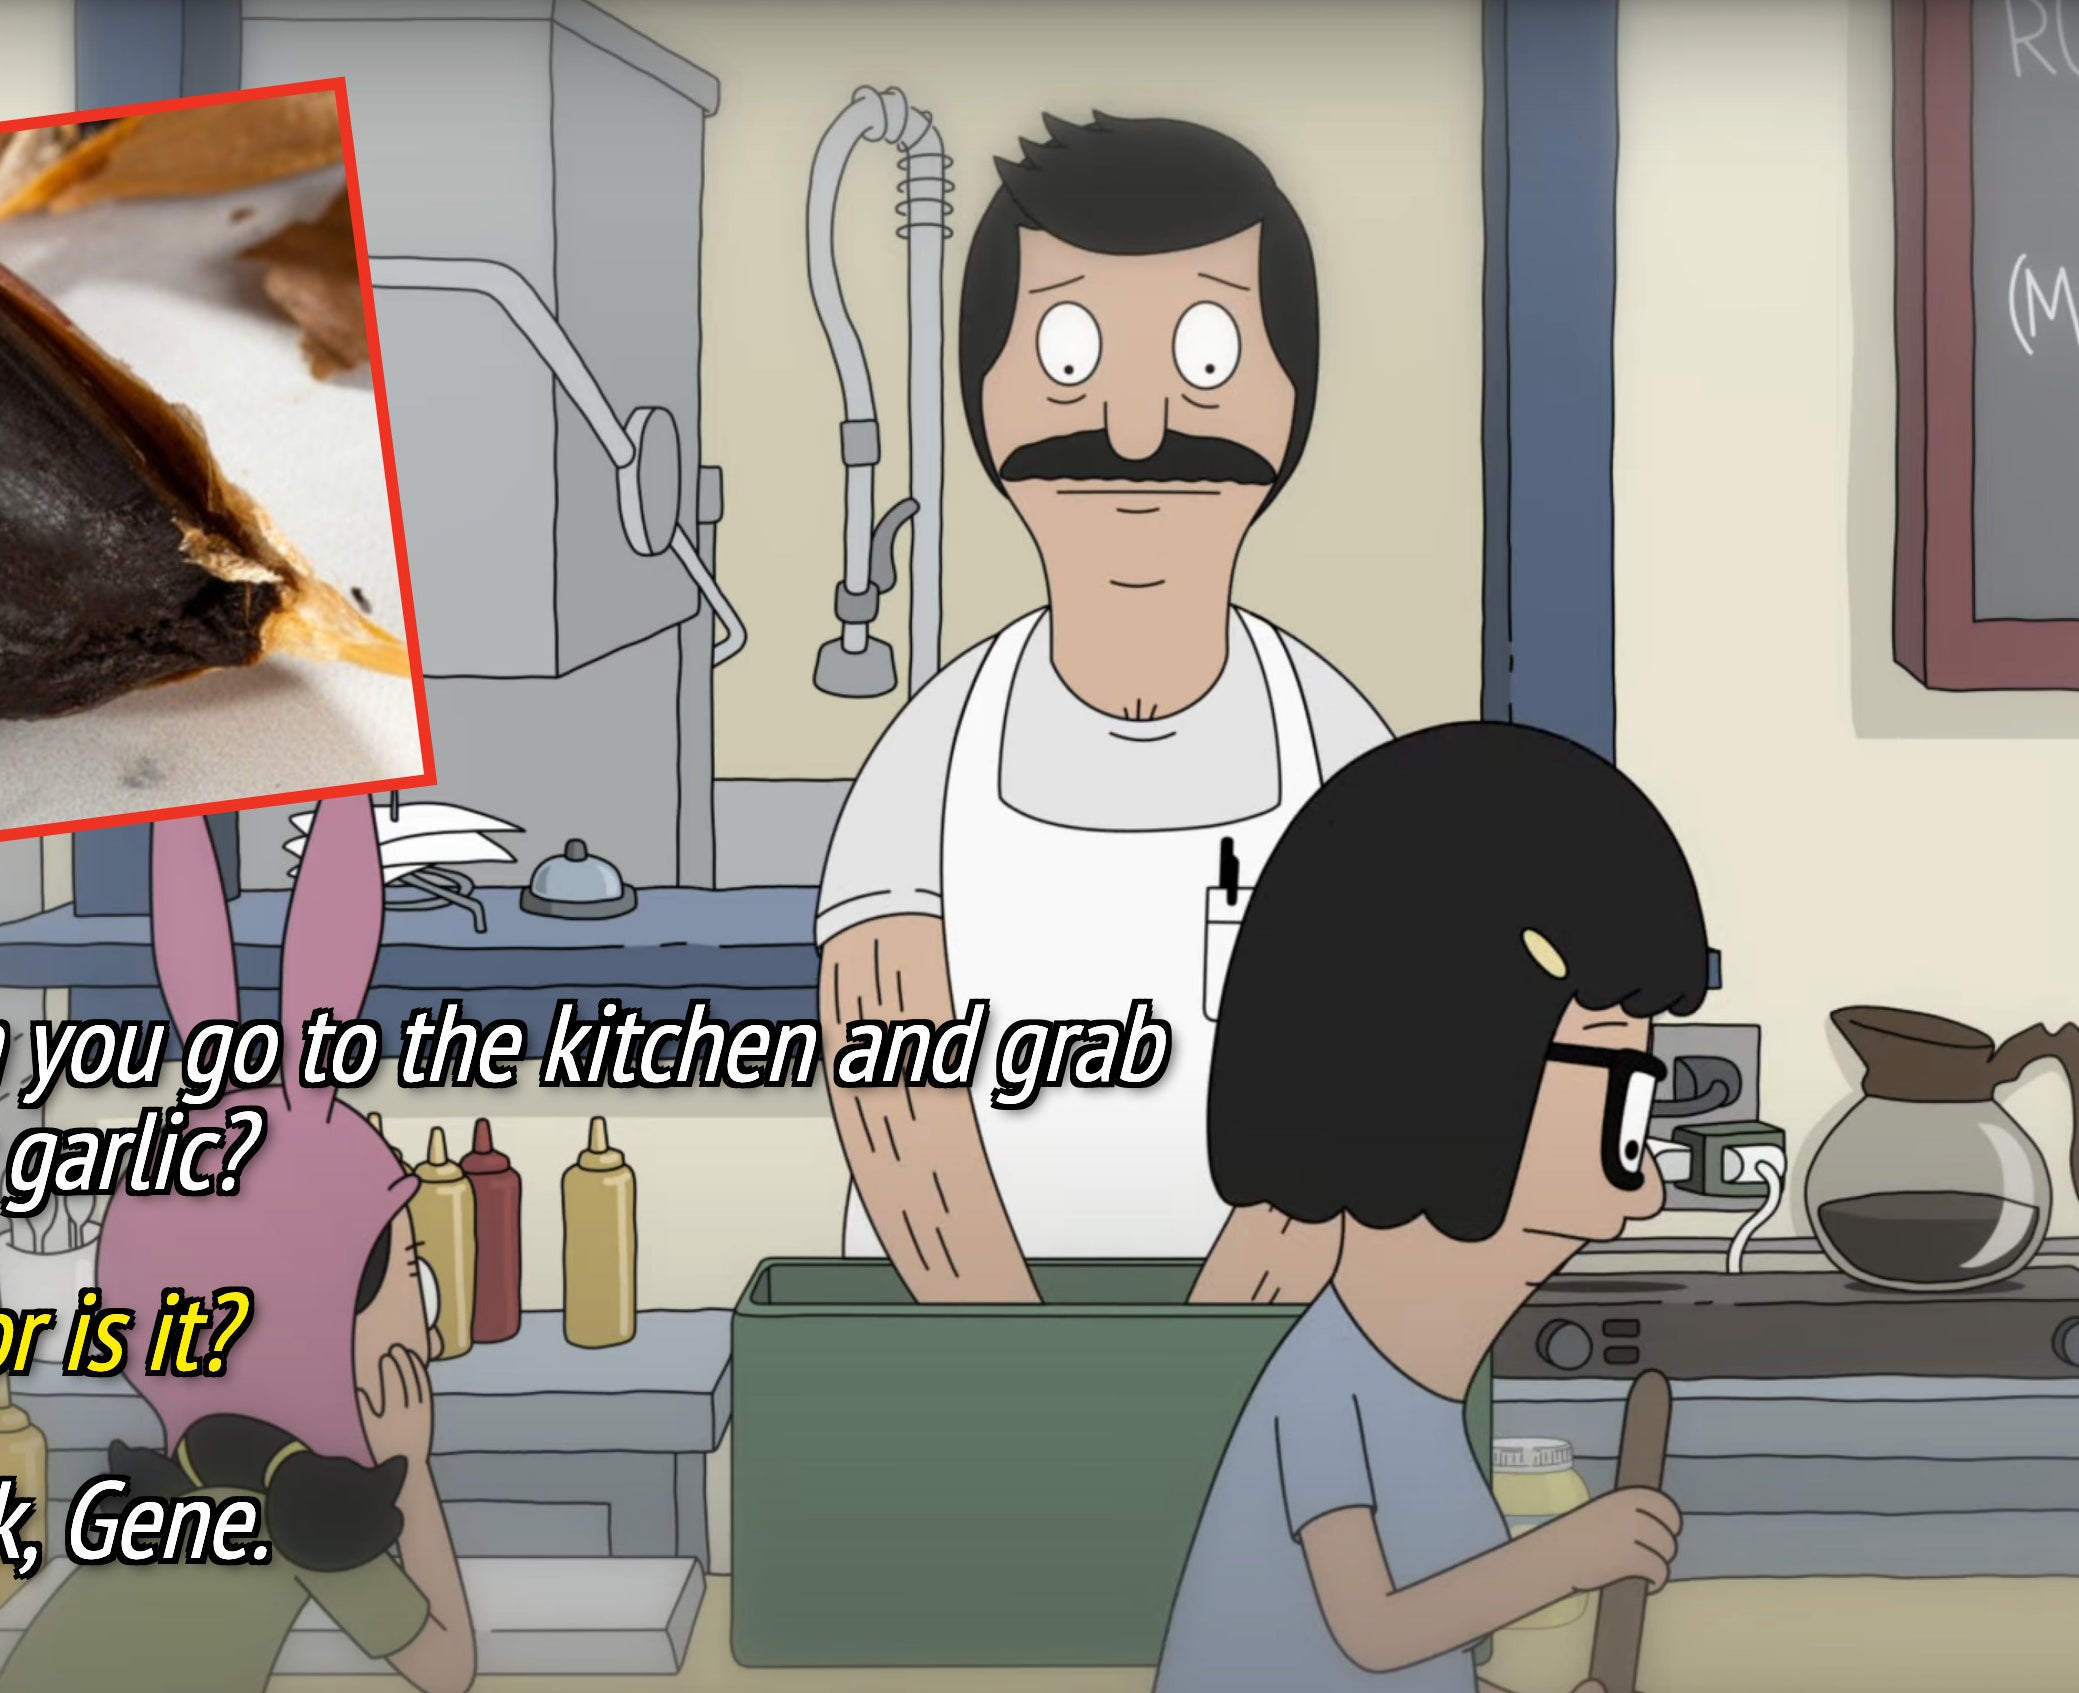 bob from bob&#x27;s burgers asking gene to get black garlic in the kitchen, with inset image of black garlic clove for reference